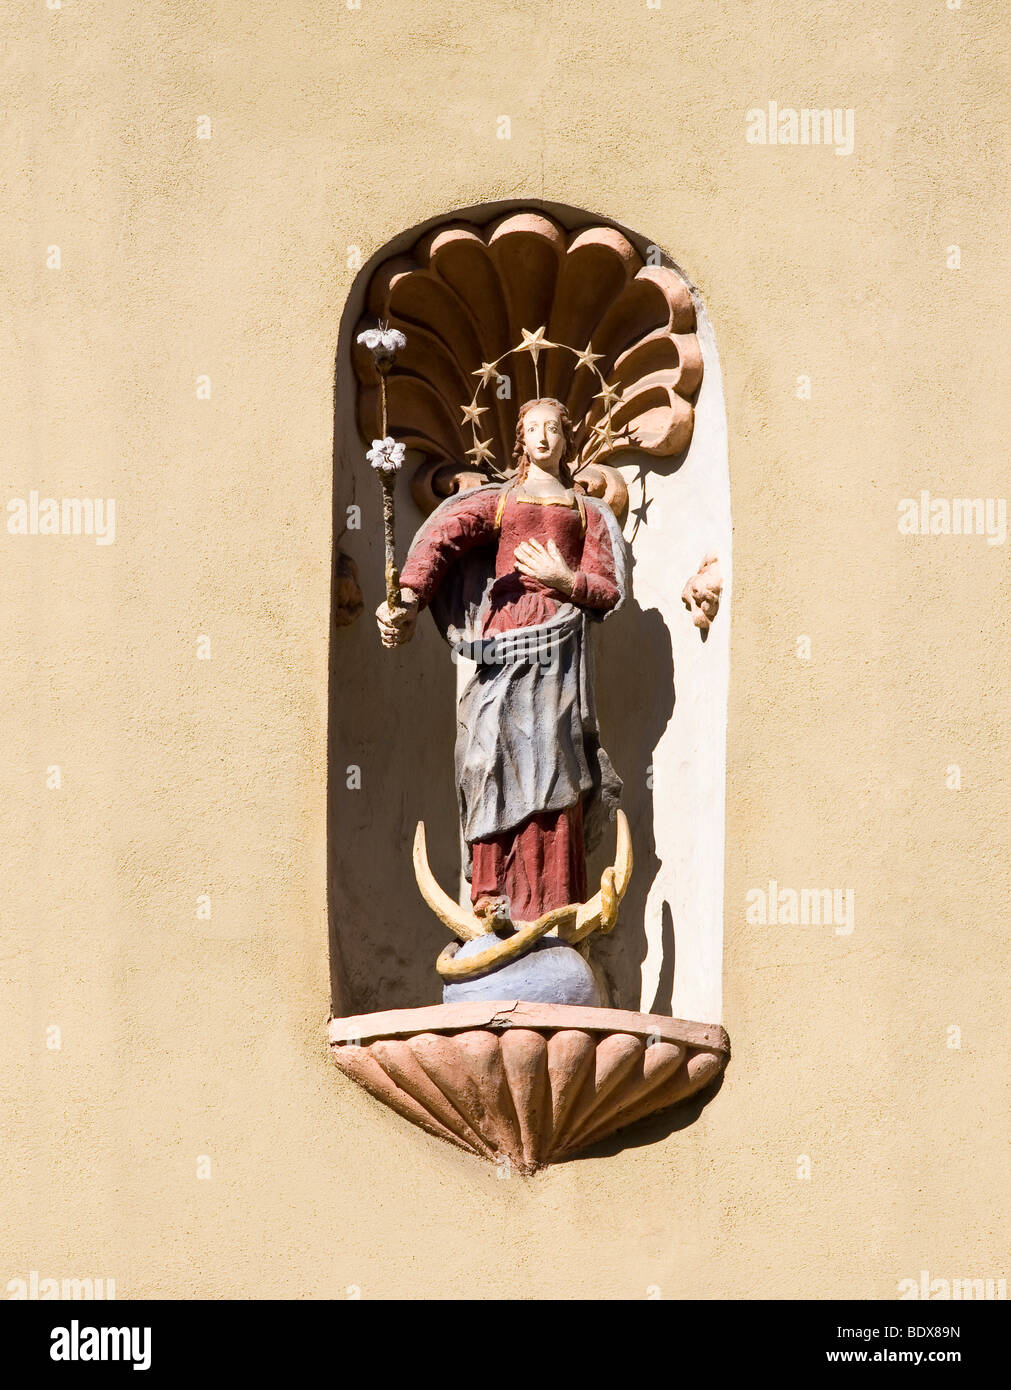 Holy figure at a house facade in Bad Radkersburg, Styria, Austria, Europe Stock Photo